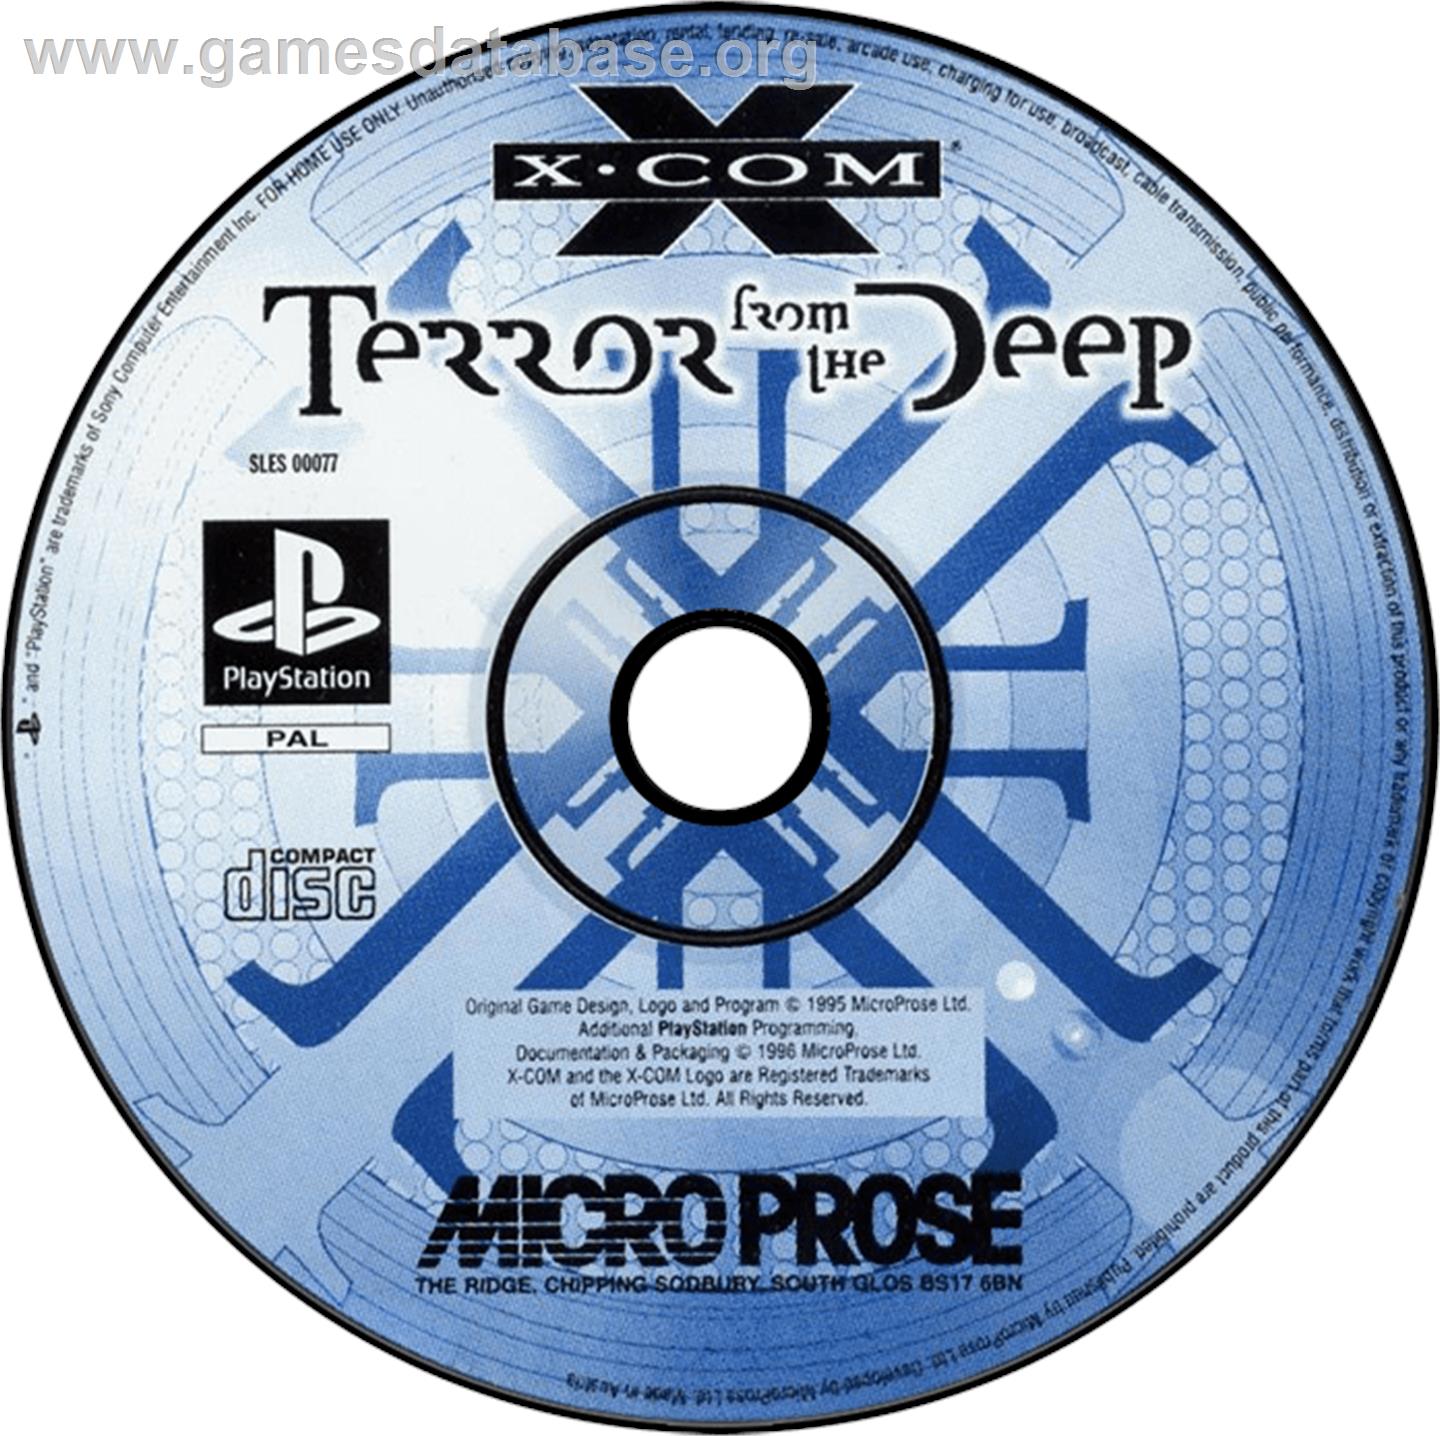 X-COM: Terror from the Deep - Sony Playstation - Artwork - Disc